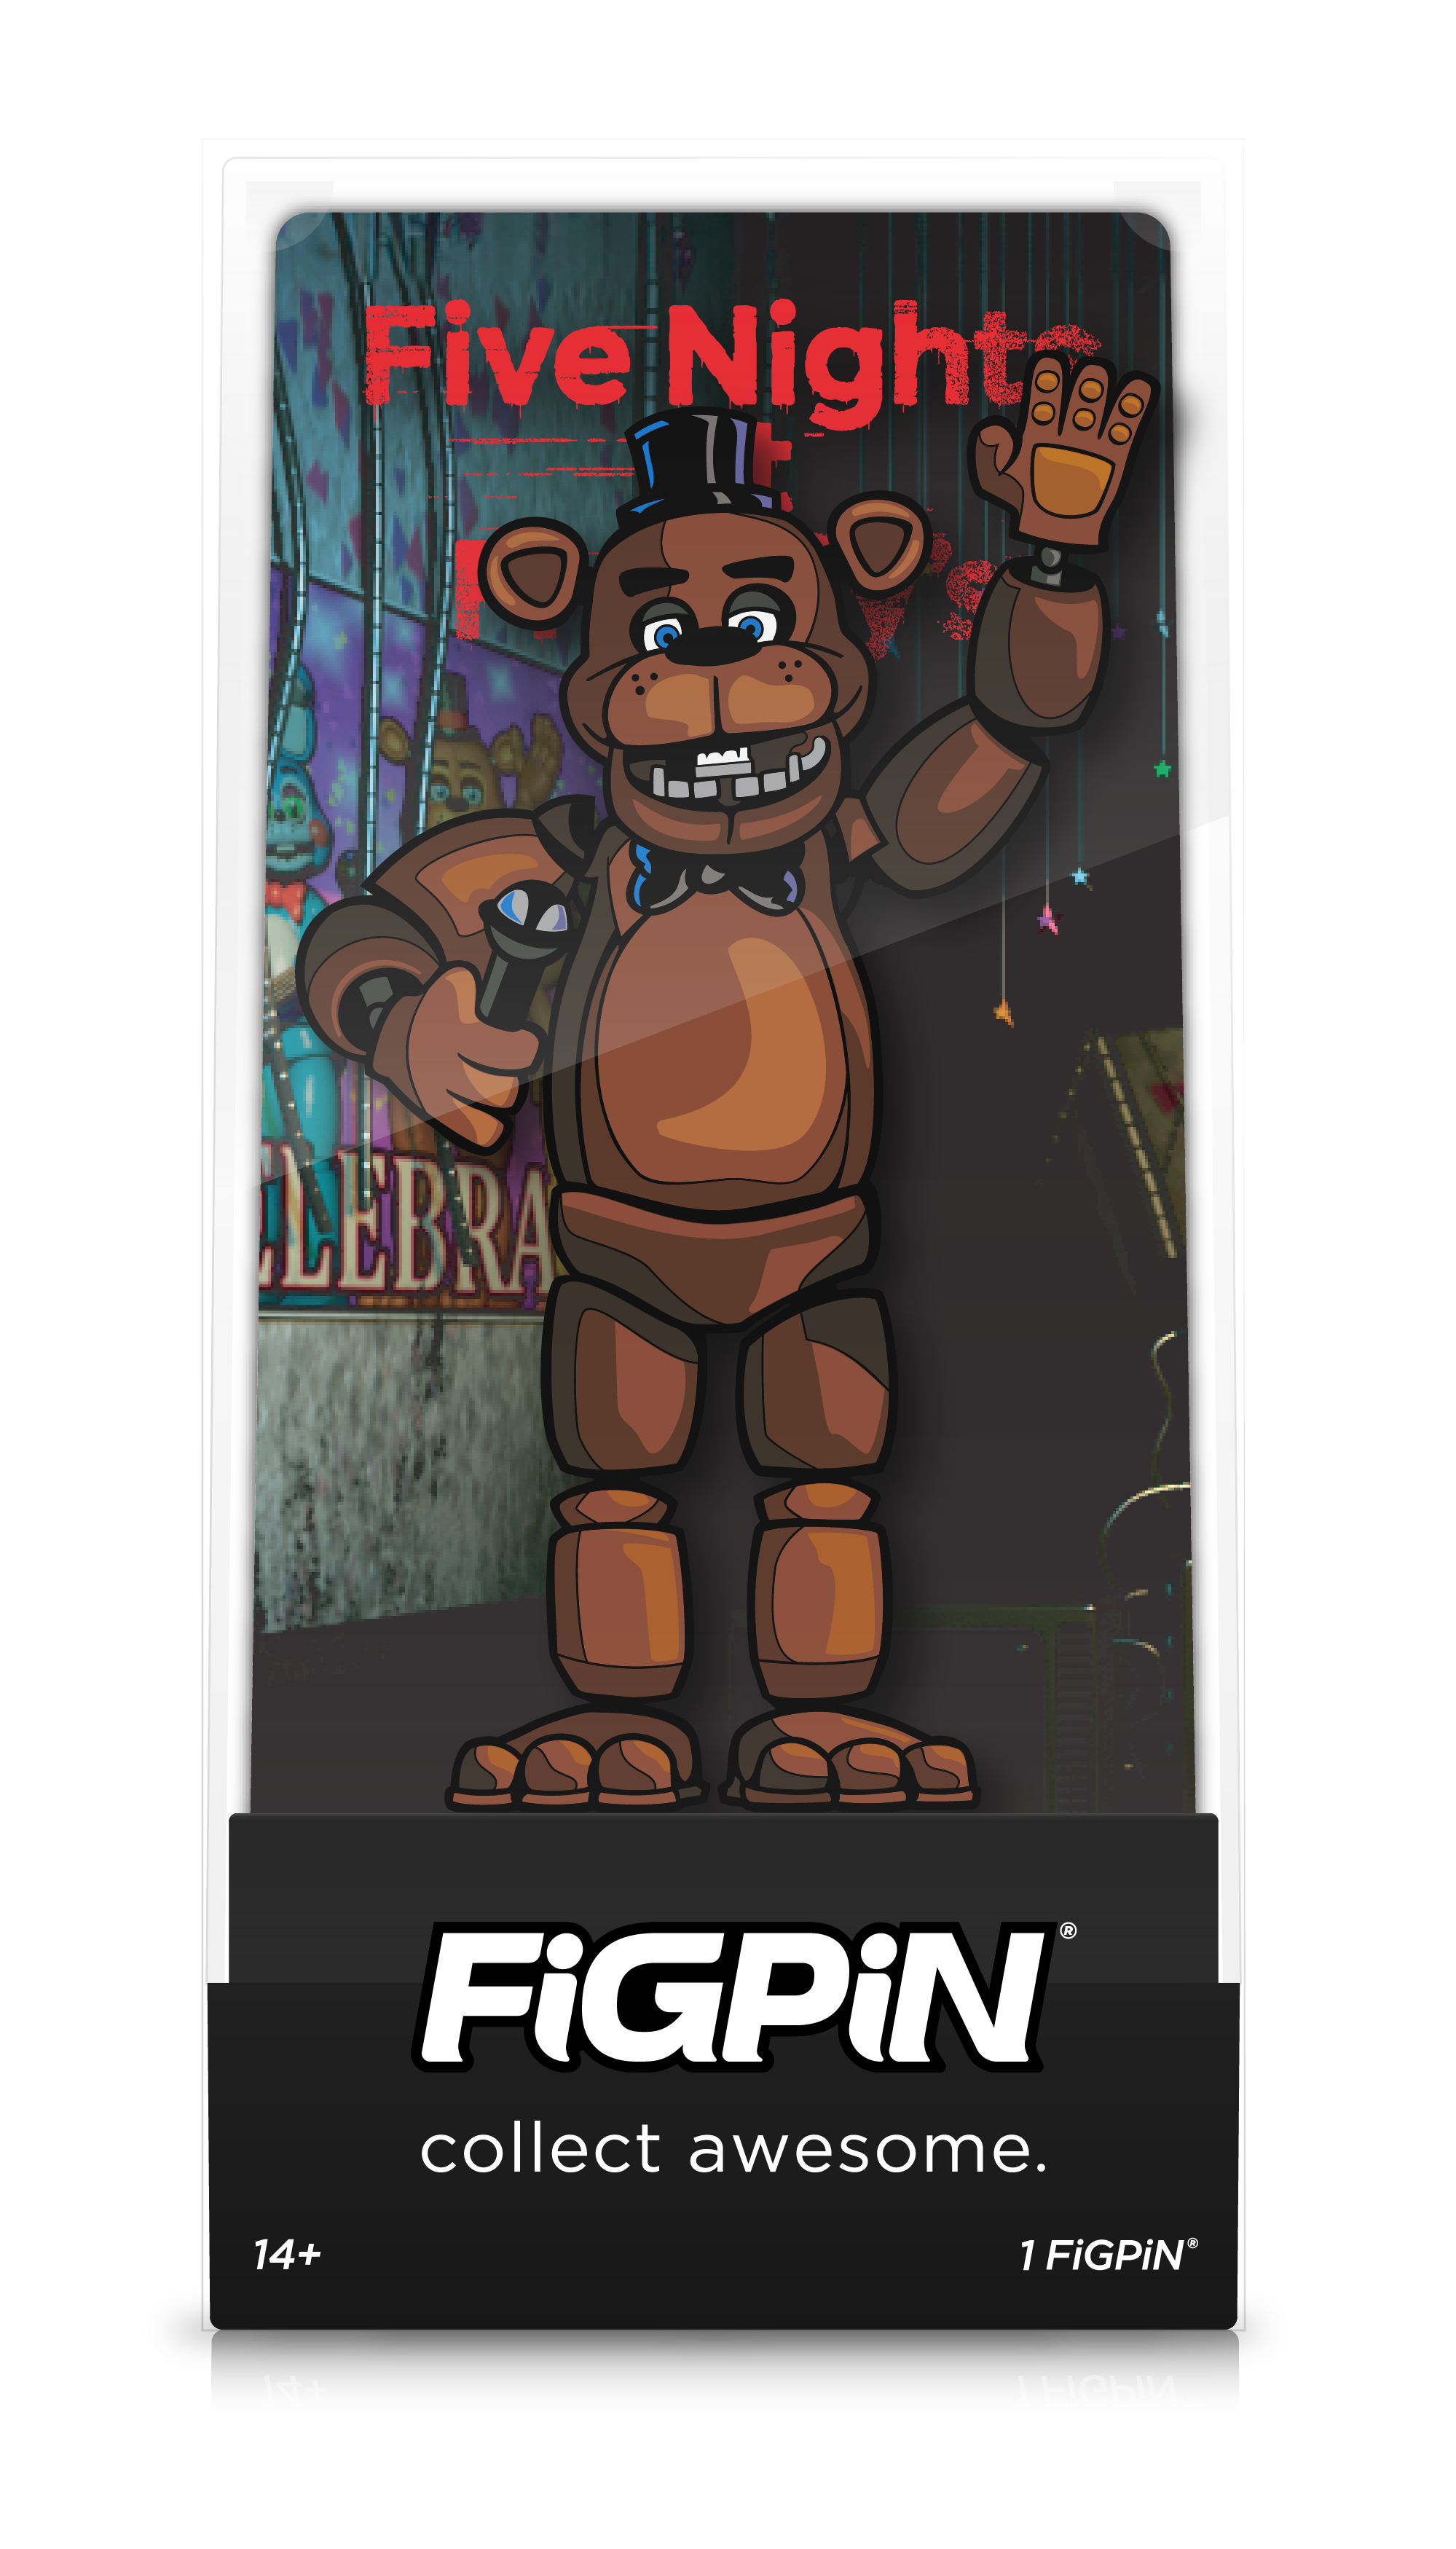 Front view of  Five Nights at Freddy's Freddy Fazbear enamel pin inside FiGPiN Display case reading “collect awesome"